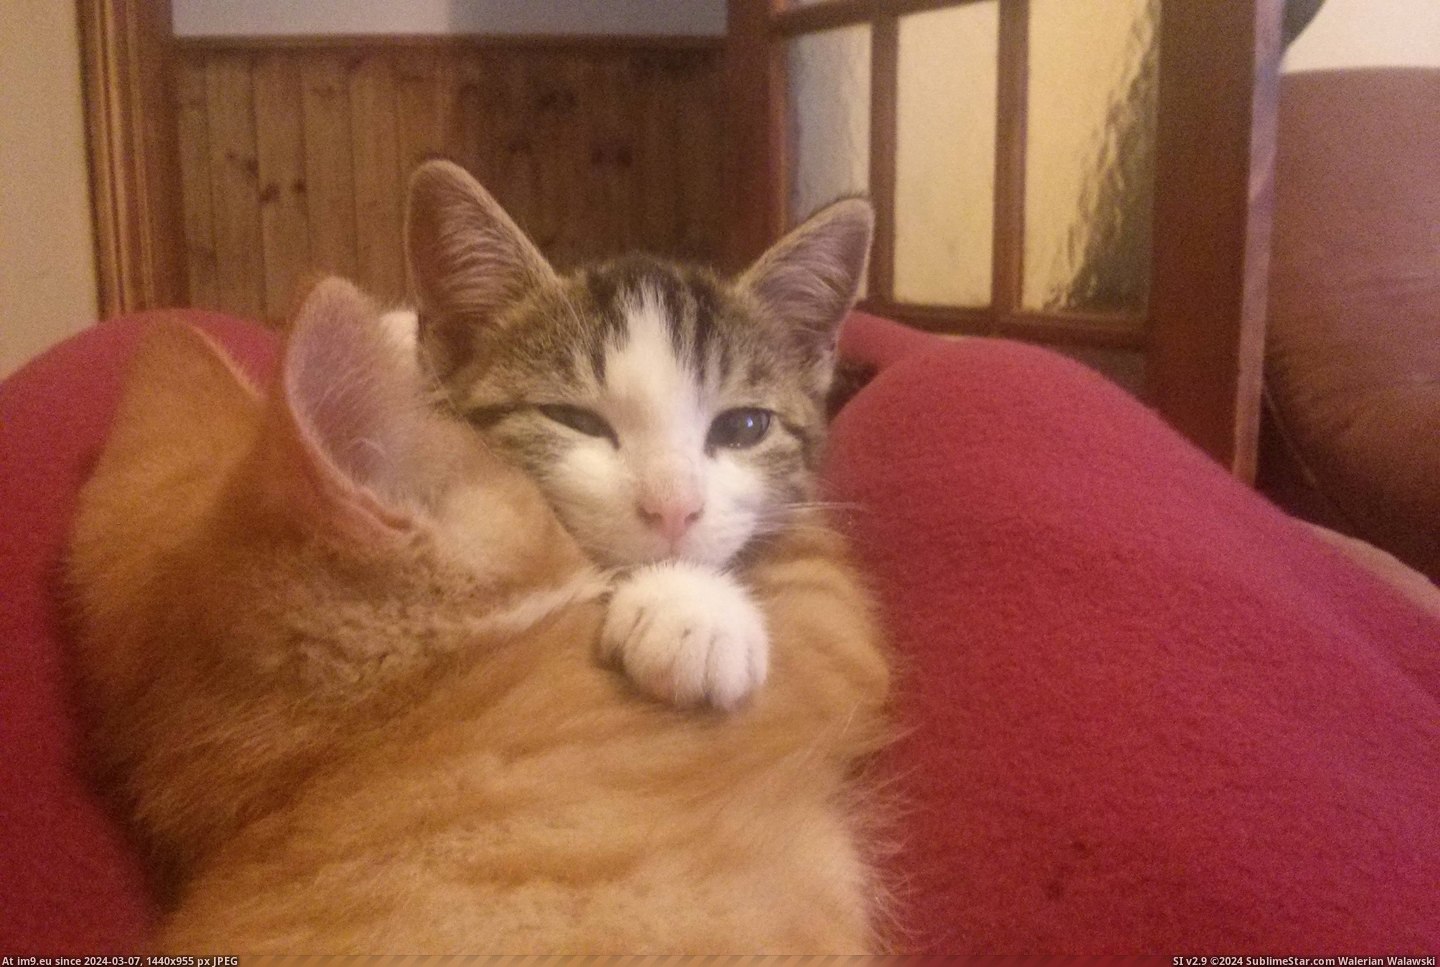 #Cats #Word #Welsh #Cwtch #Means #Cuddle [Cats] There's a word in welsh, cwtch. It means cuddle. Pic. (Image of album My r/CATS favs))